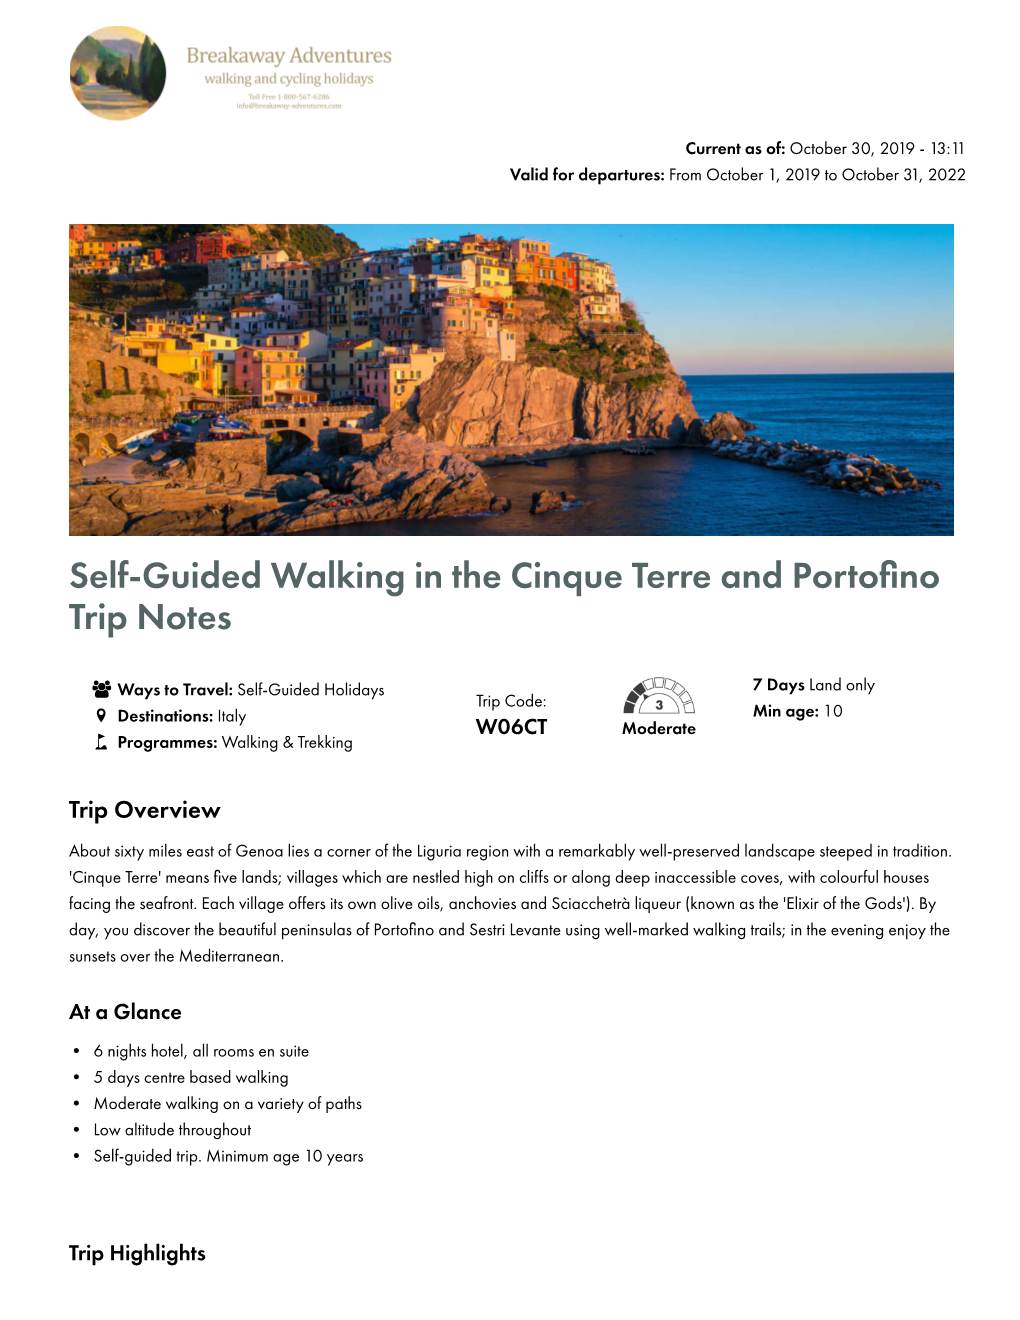 Self-Guided Walking in the Cinque Terre and Porto No Trip Notes